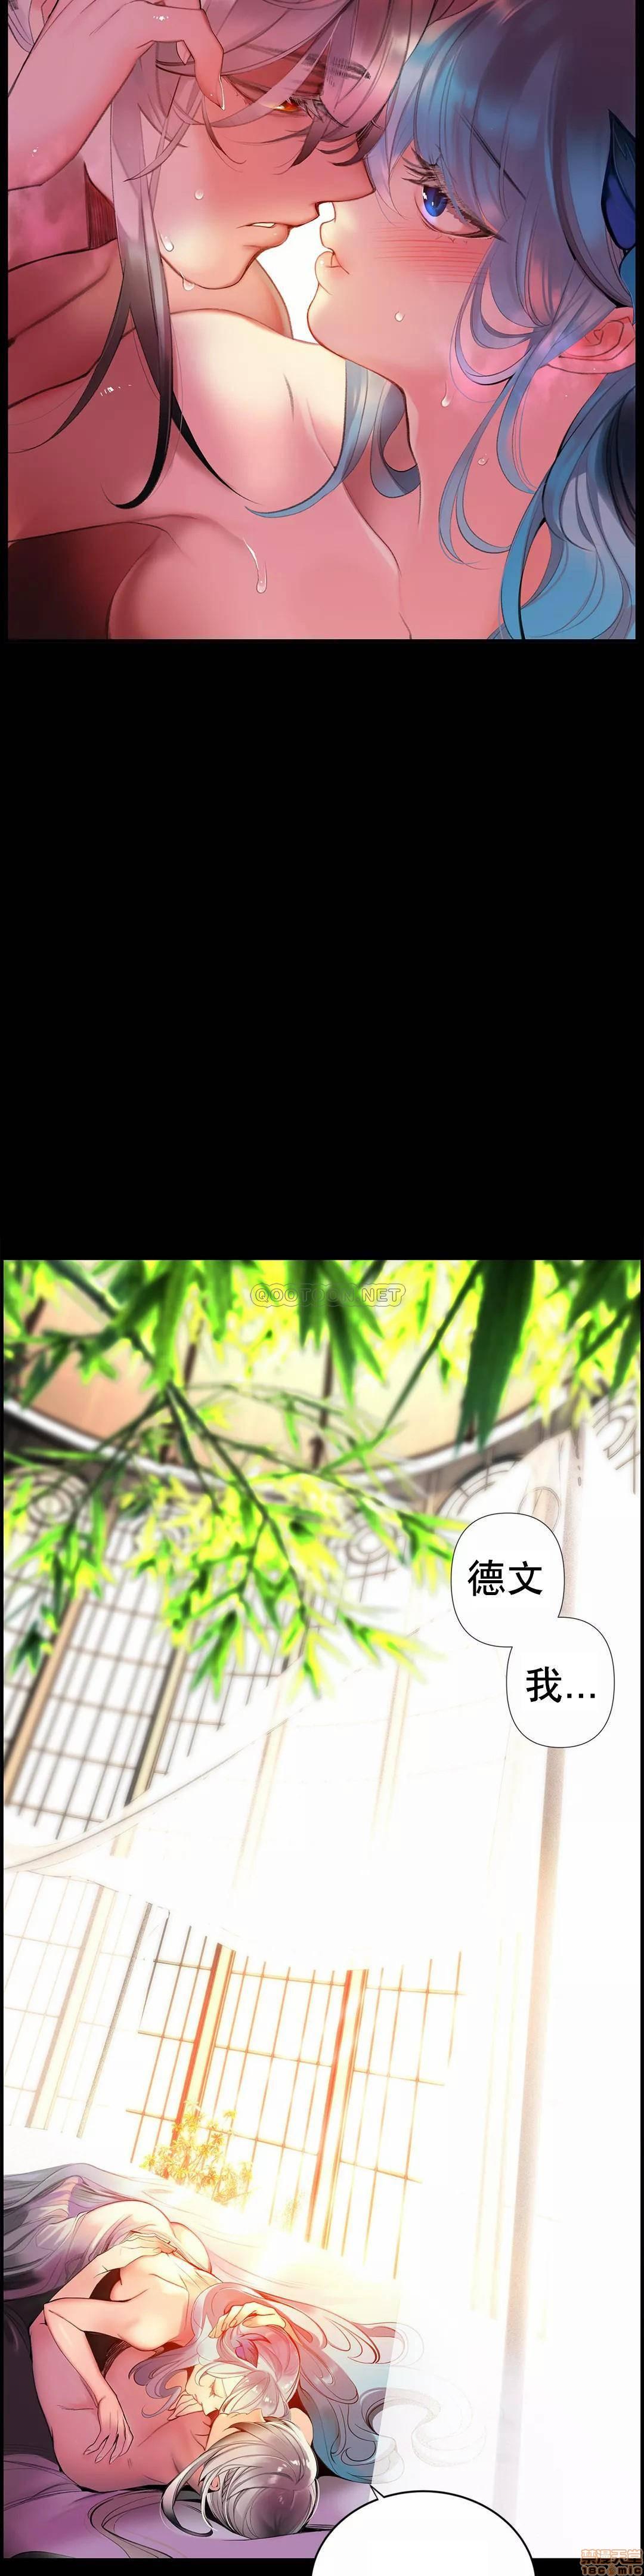 [Juder] Lilith`s Cord (第二季) Ch.77-93 end [Chinese] 92